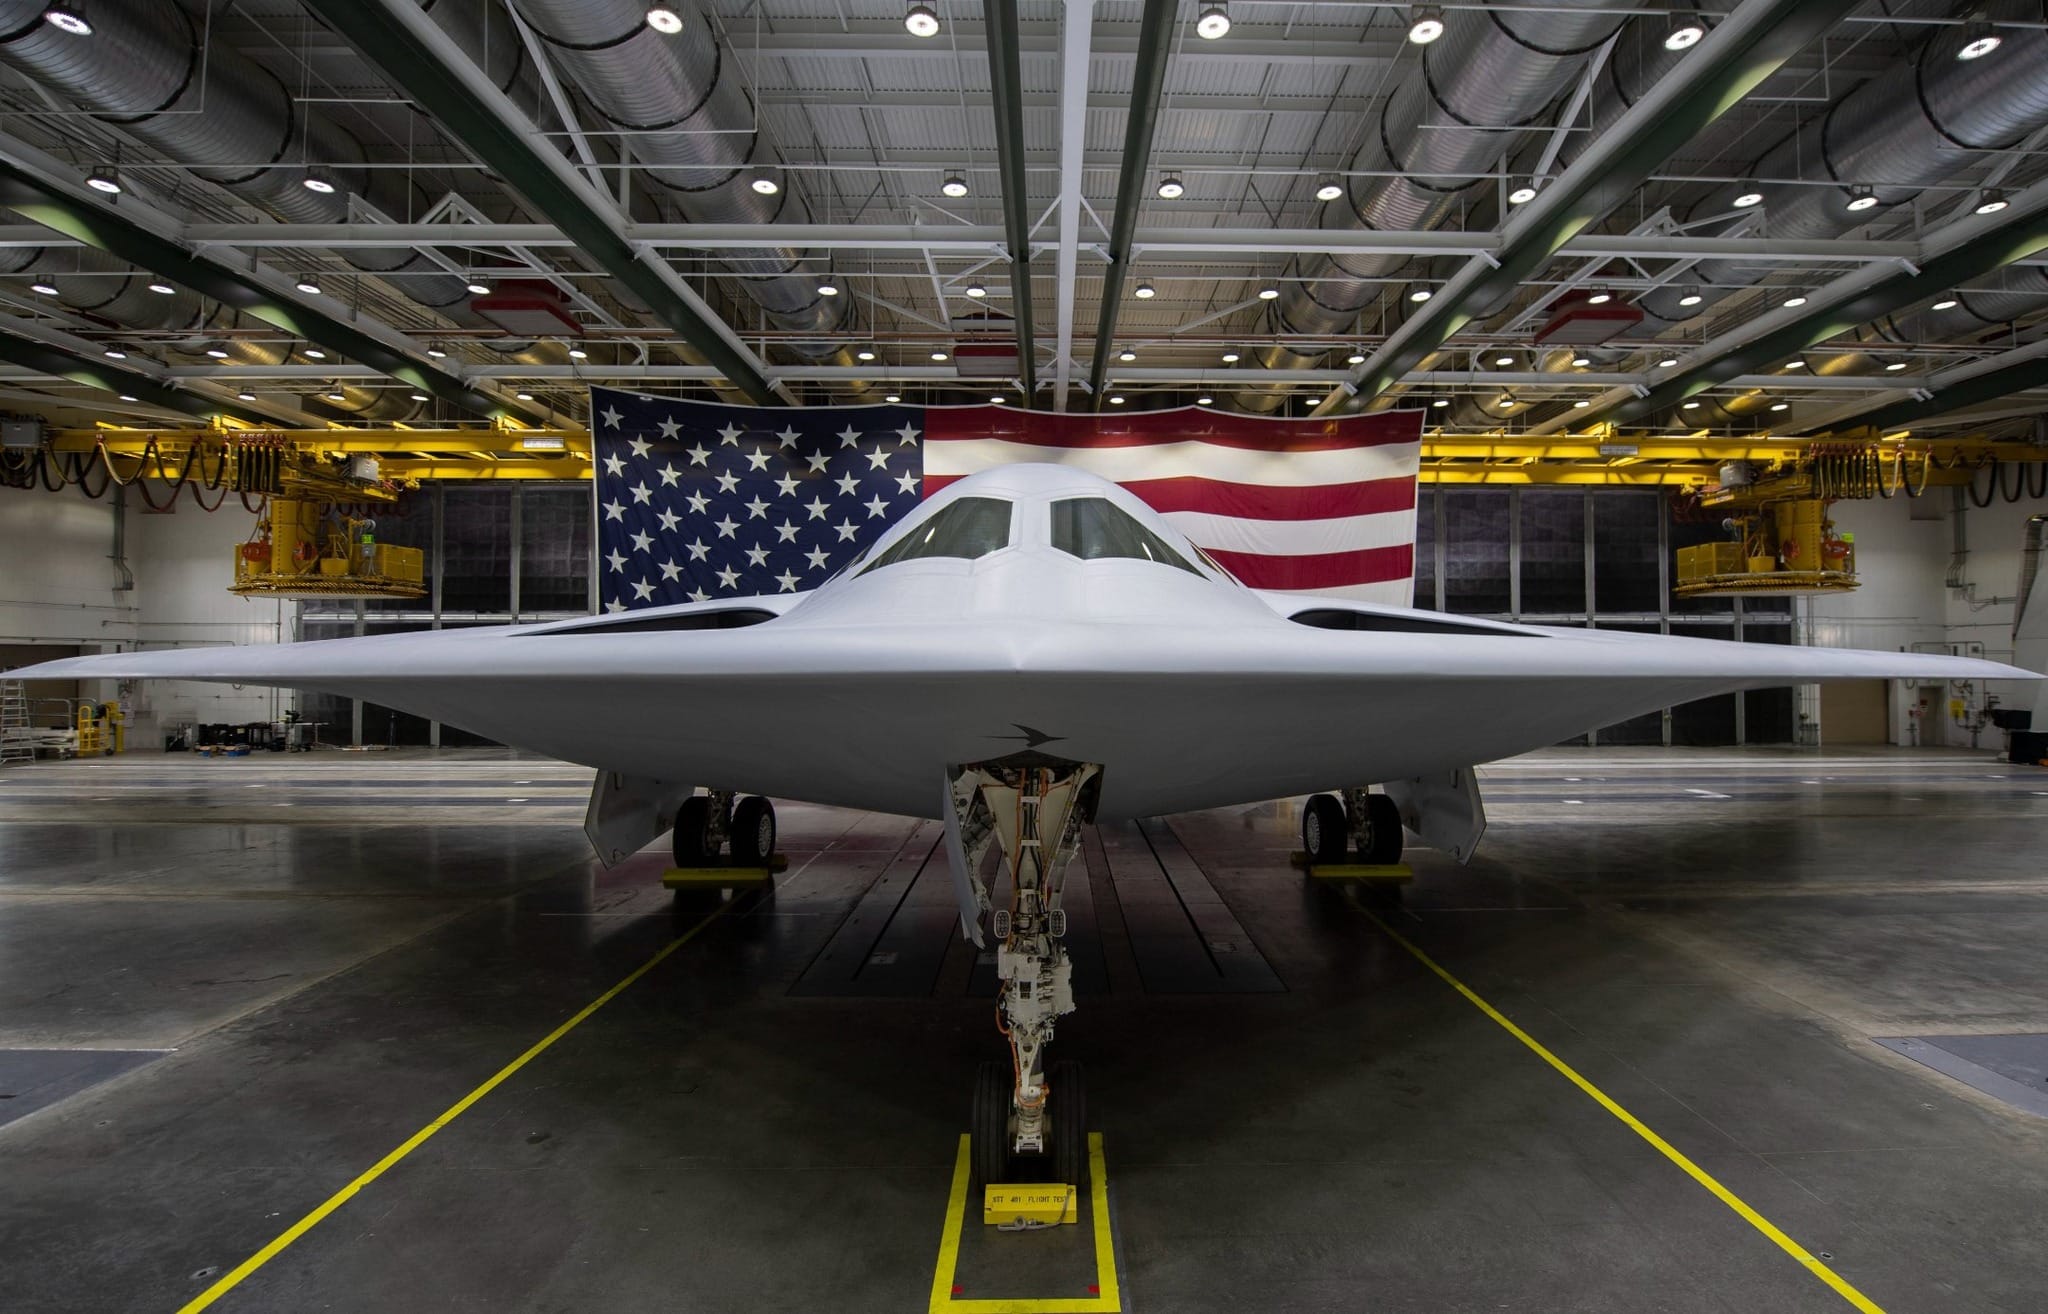 The United States has unveiled its latest high-tech strategic bomber – the B-21 Raider – which is capable of carrying a nuclear payload and can be flown without a crew on board